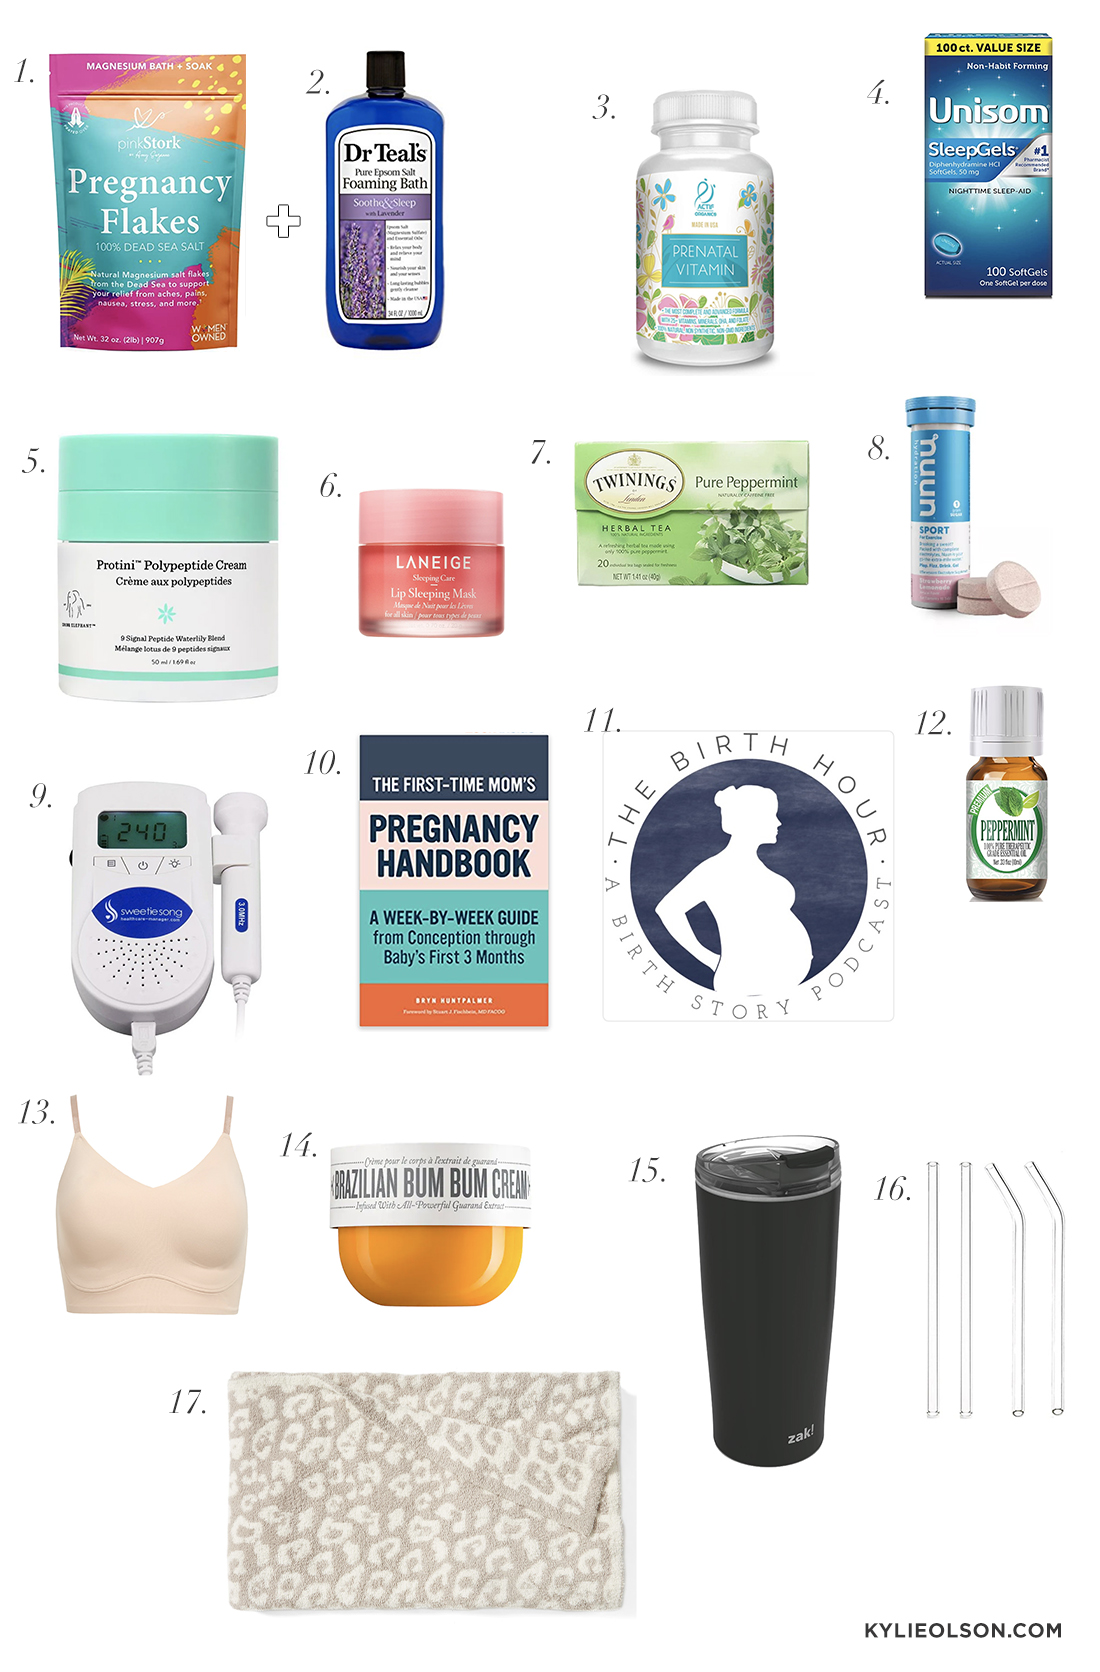 First Trimester of Pregnancy Must-Haves – Kylie Olson